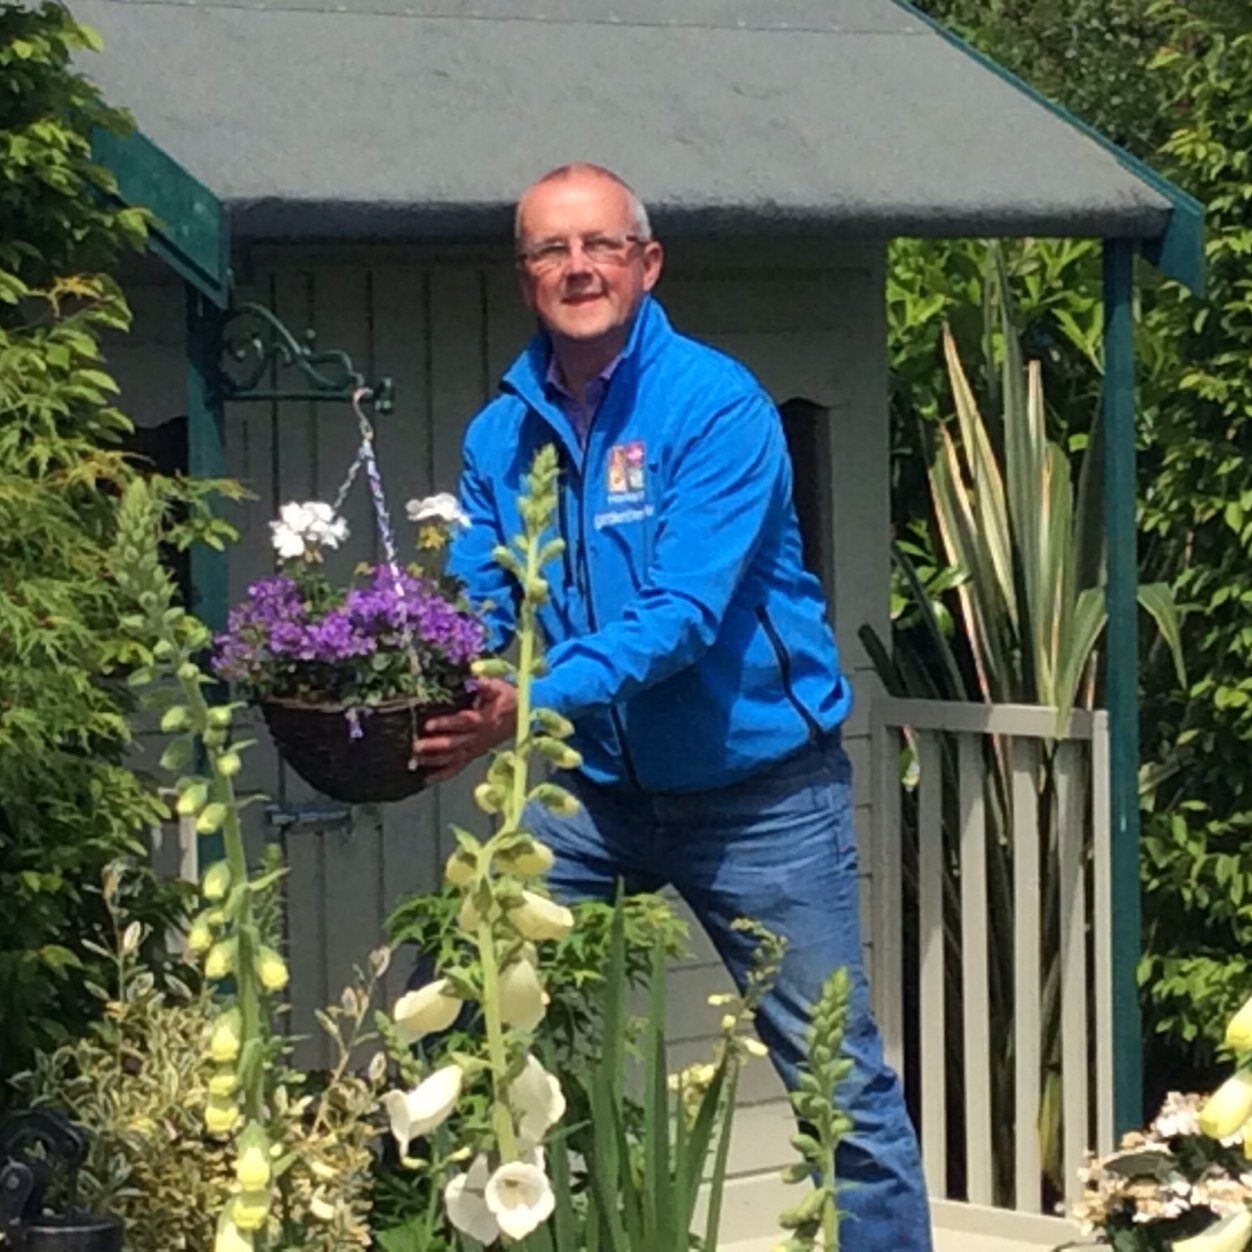 Paraic is a Qualified Horticulturist from The National Botanic Gardens. He is the resident Gardening correspondent for Newstalk radio 1 -Midwest & Virgin Media